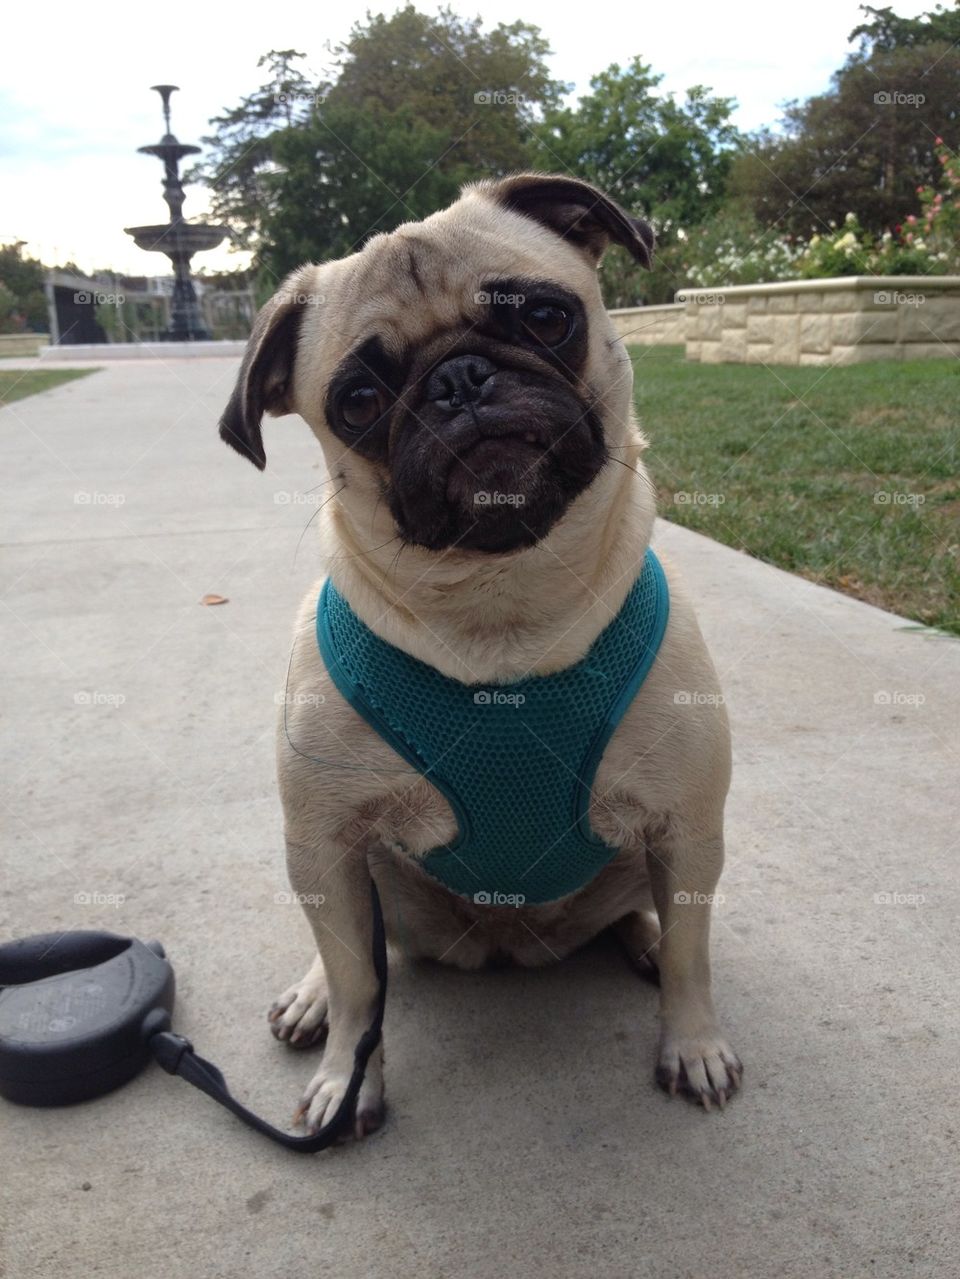 Pug out for her walk